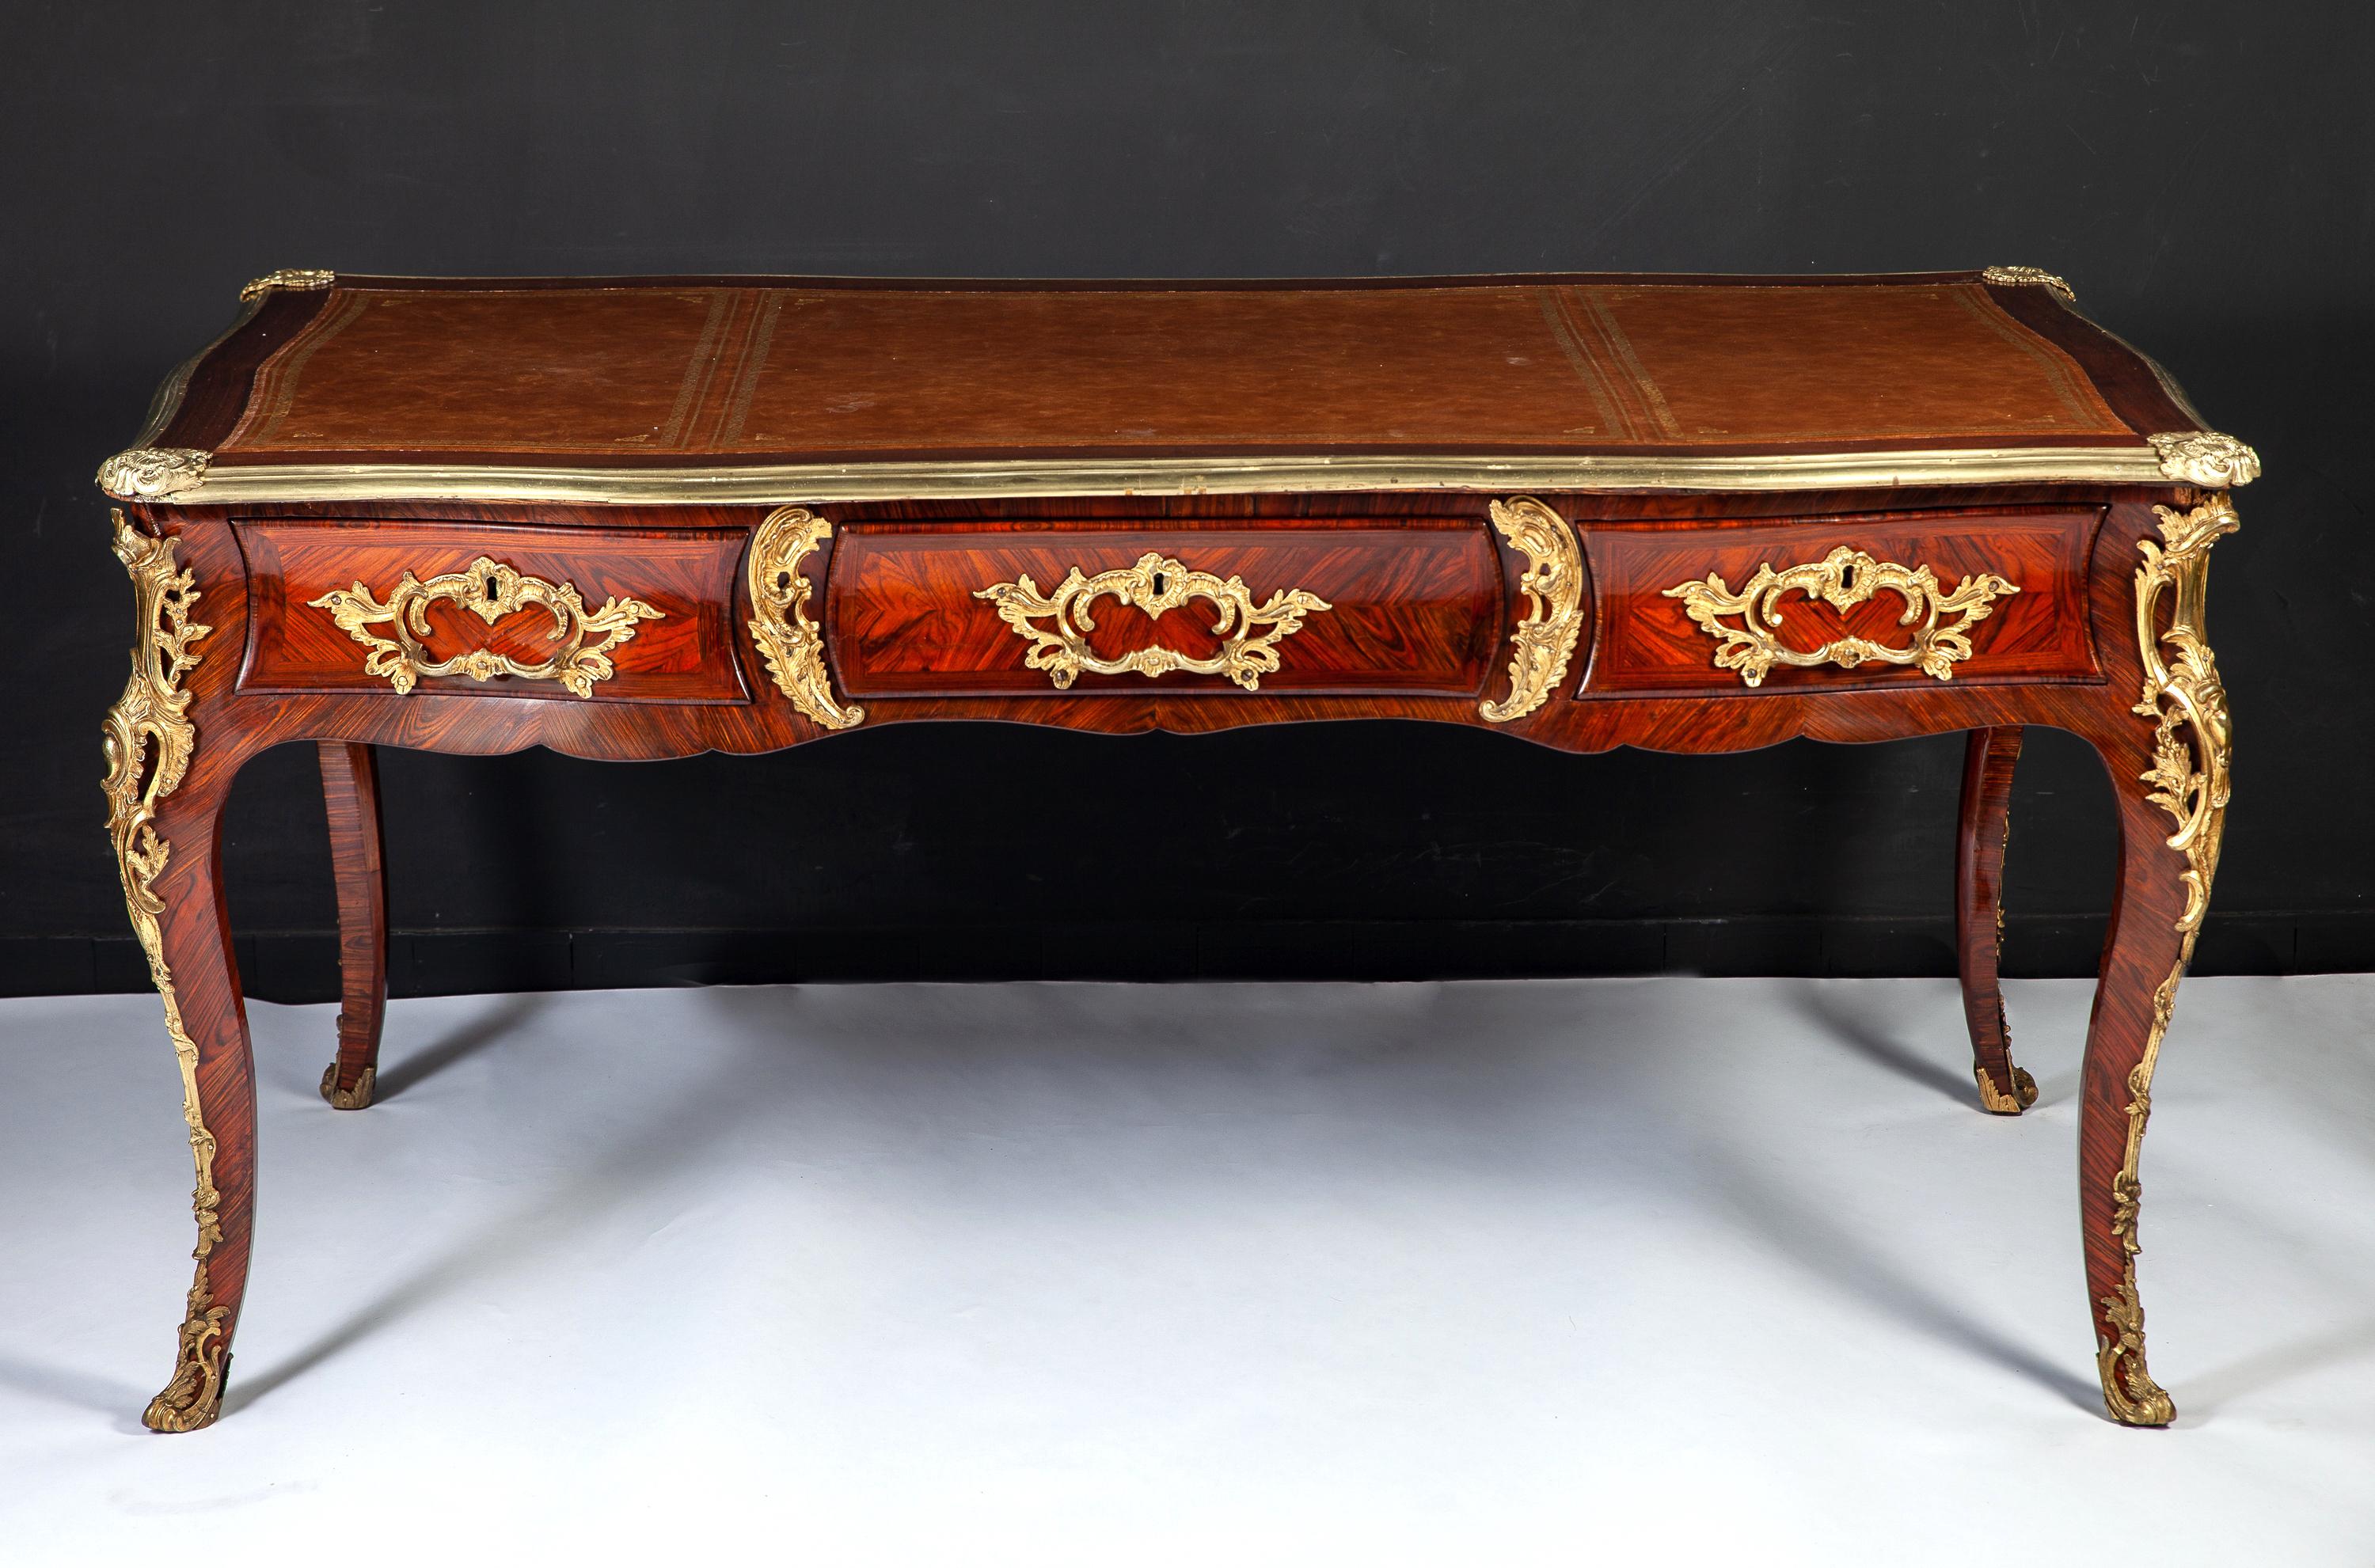 Superb quality French 18th century Louis XV , gilt bronze-mounted Kingwood bureau plat .
The shaped rectangular top inset with a tooled leather writing panel and fitted with three drawers to the undulating frieze, raised on cabriole